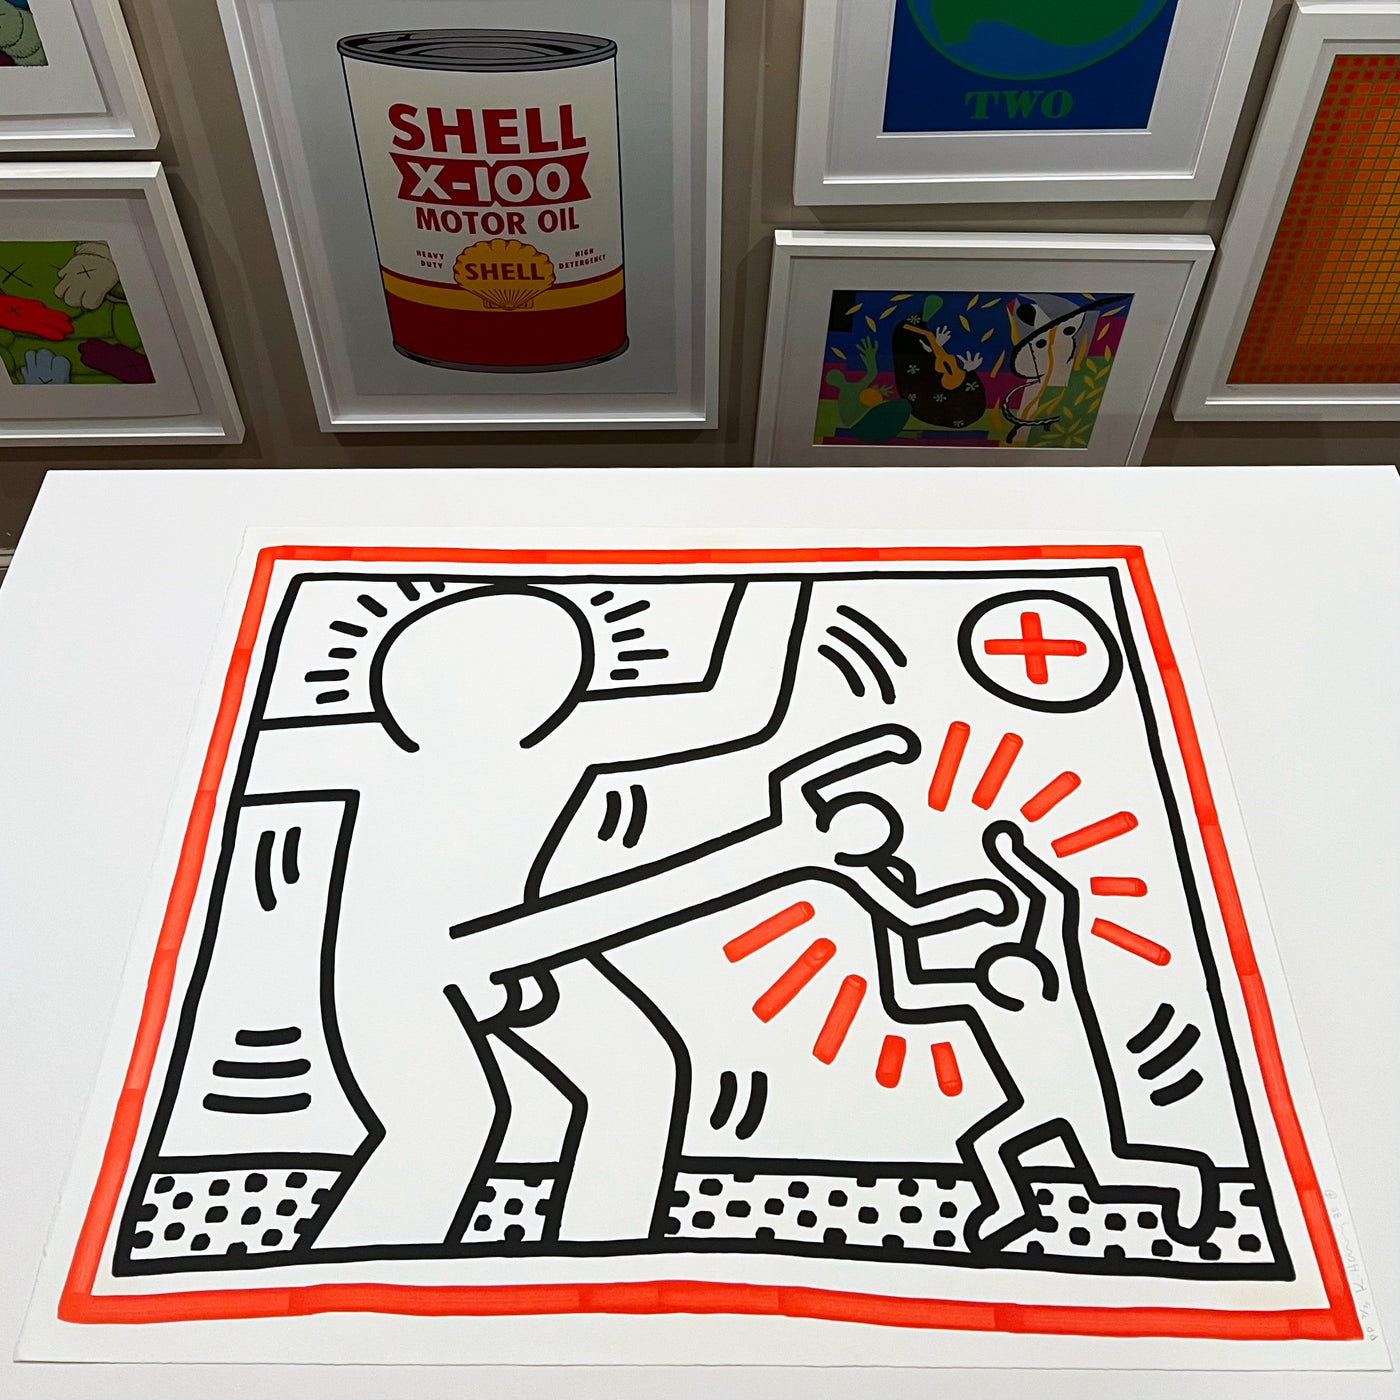 Keith Haring Untitled from Three Lithographs, 1985 1985